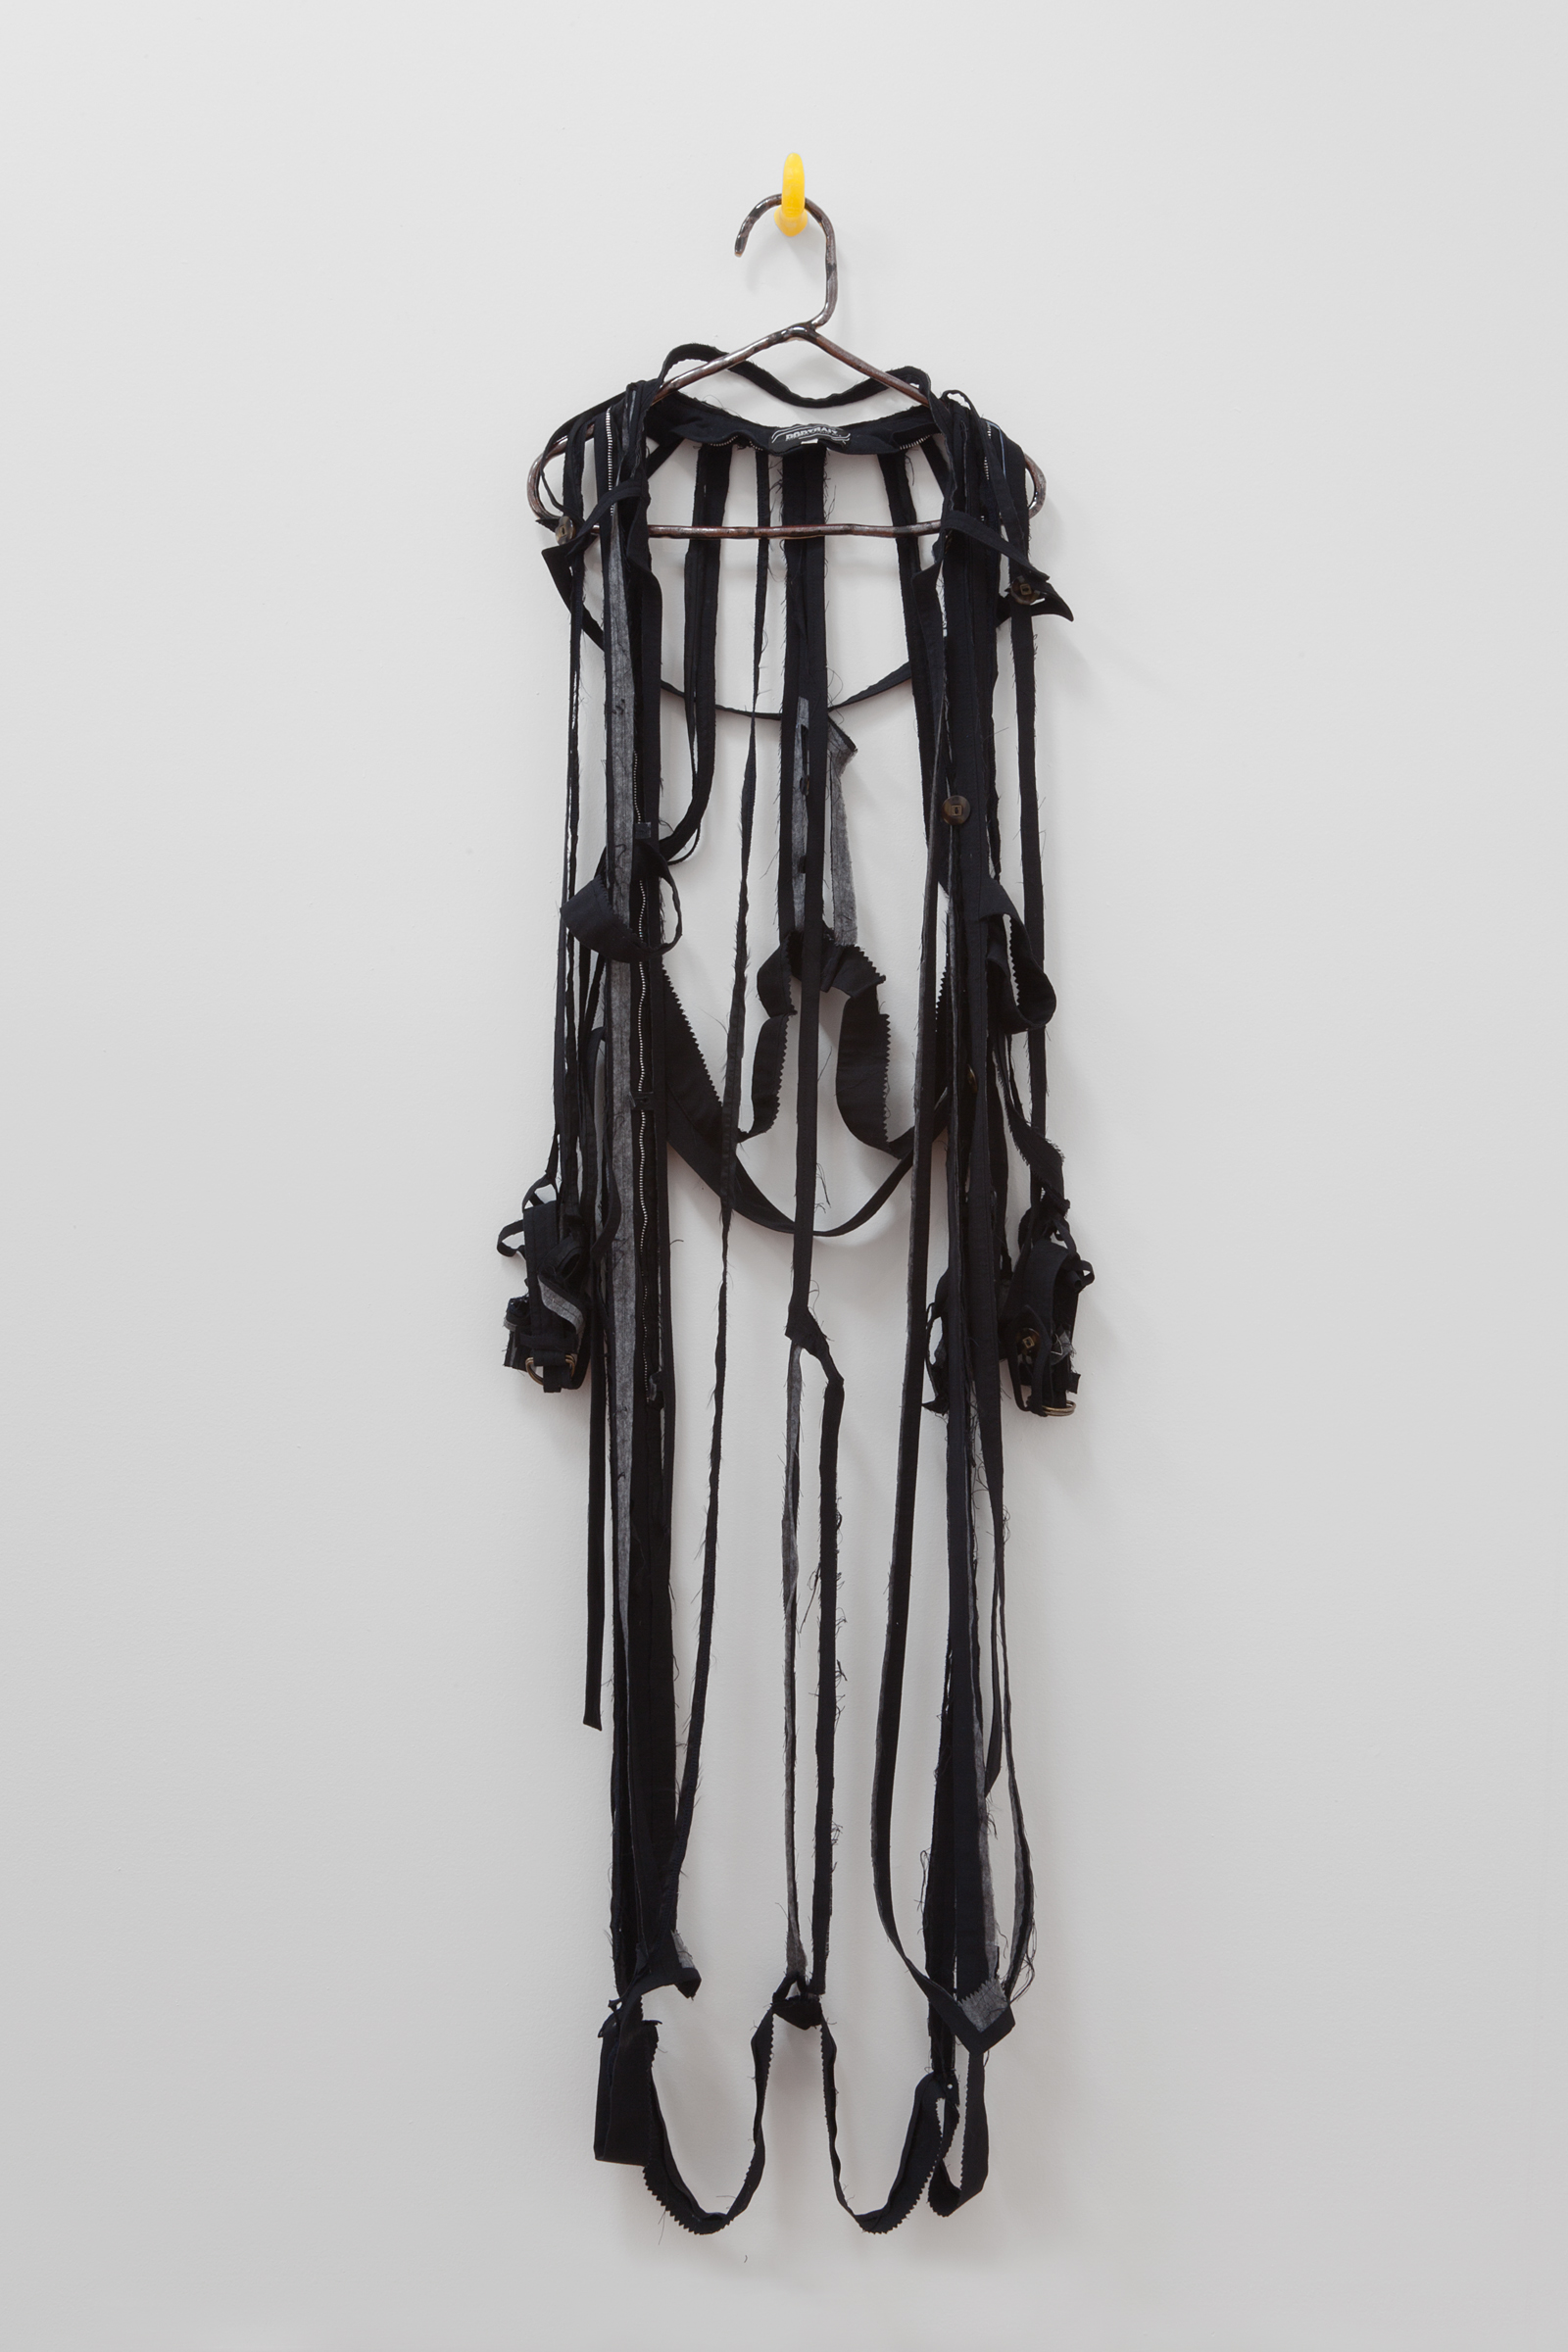   ANNA SEW HOY   black/noire , fired stoneware, trench coat and resin finger hook, 62.5" x 16.5" x 4", 2012 